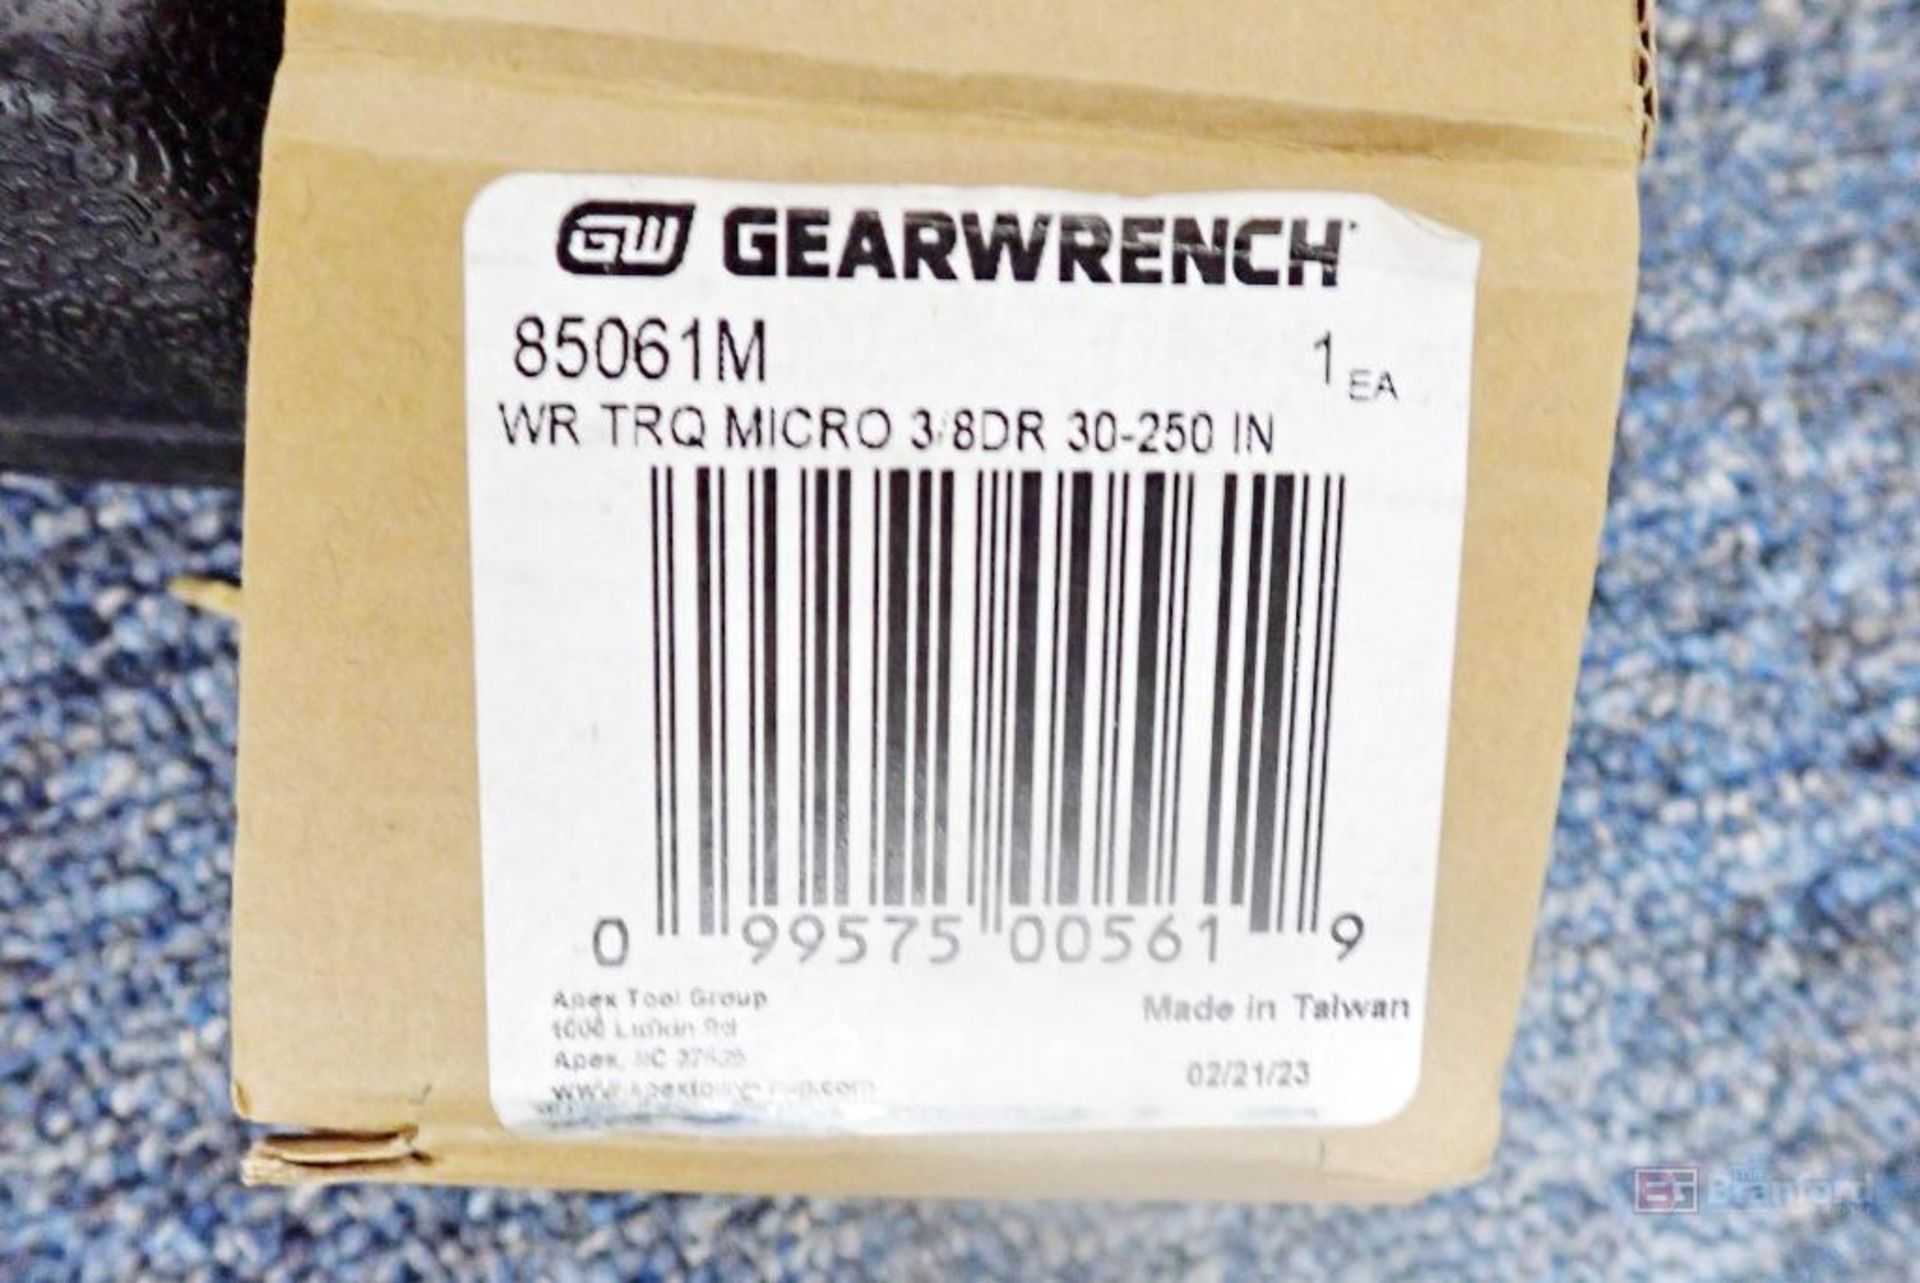 GearWrench 85061M (8858175) 3/8" Drive Micrometer Torque Wrench - Image 3 of 3